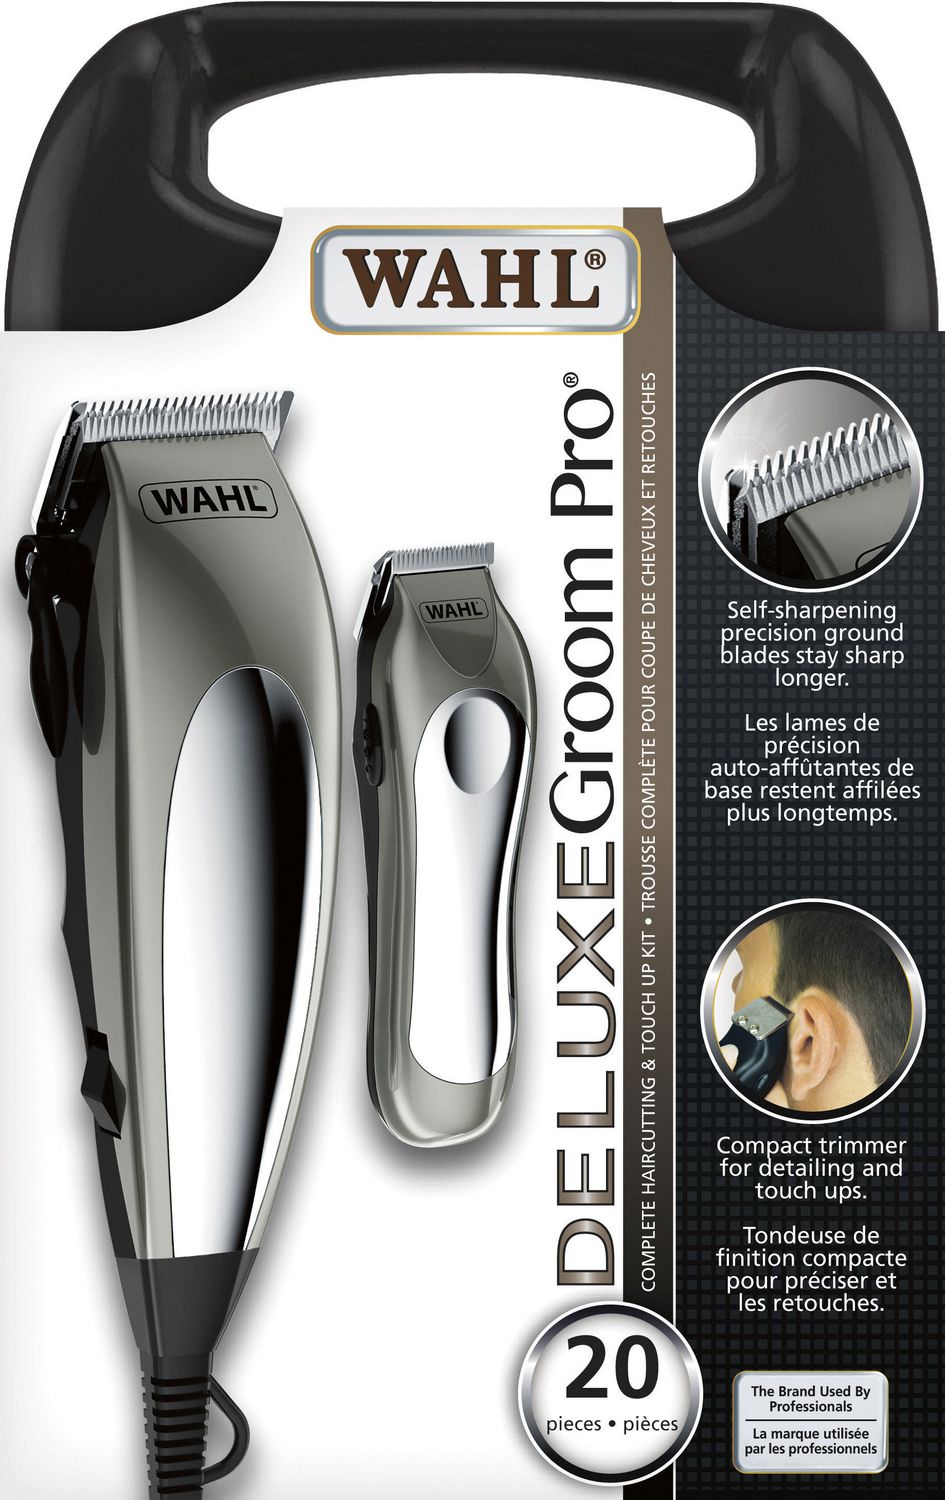 wahl 3205 review